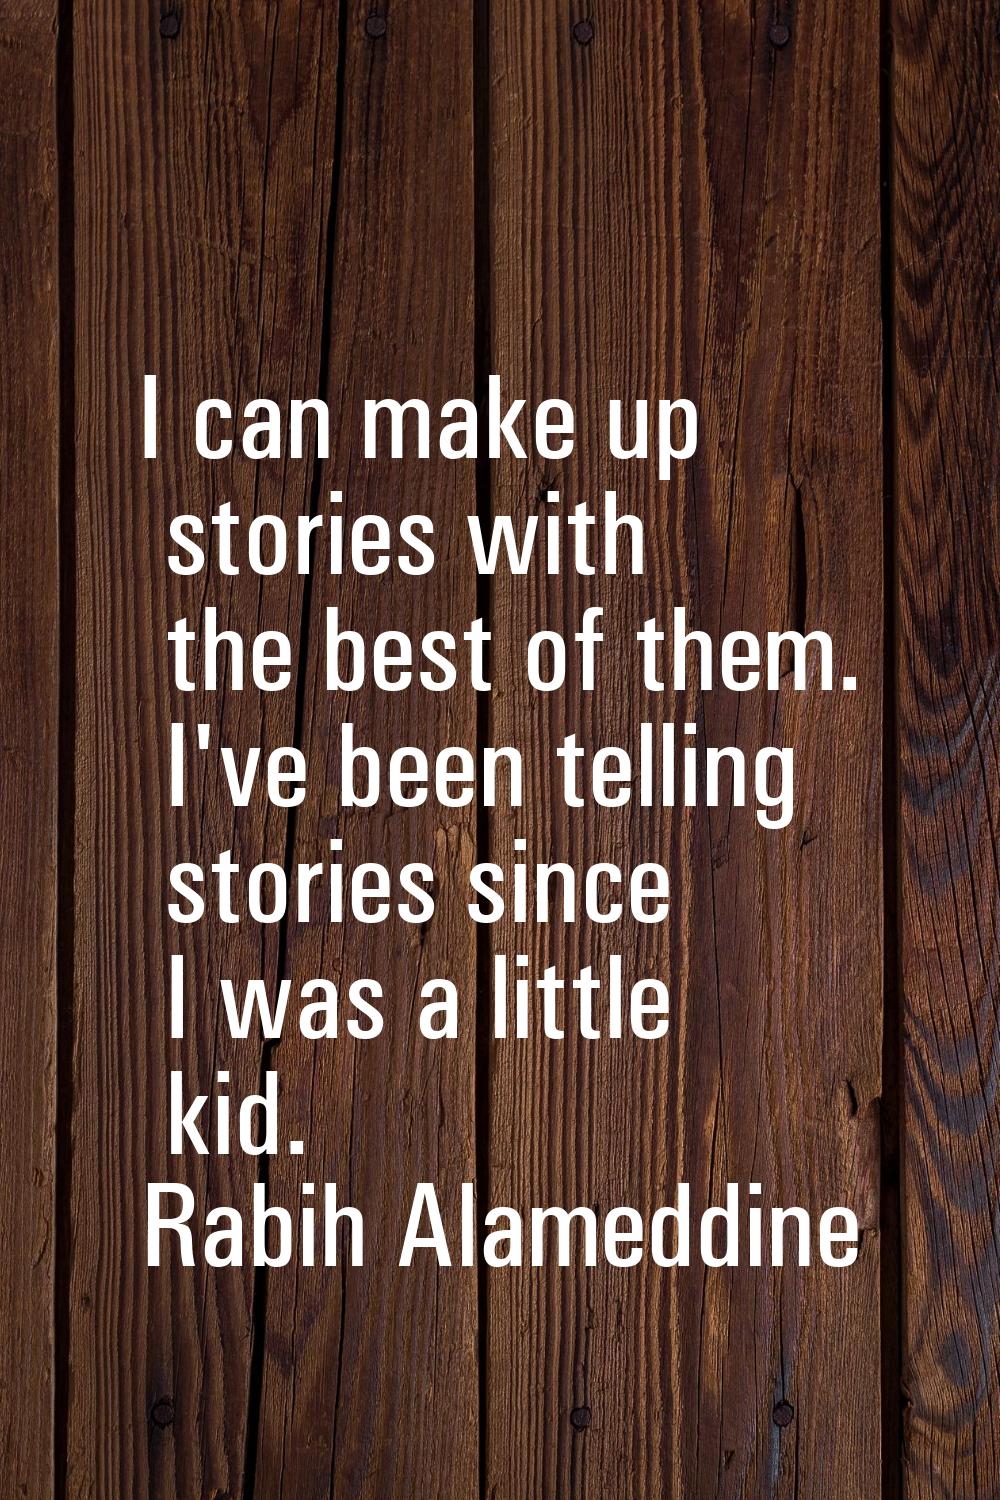 I can make up stories with the best of them. I've been telling stories since I was a little kid.